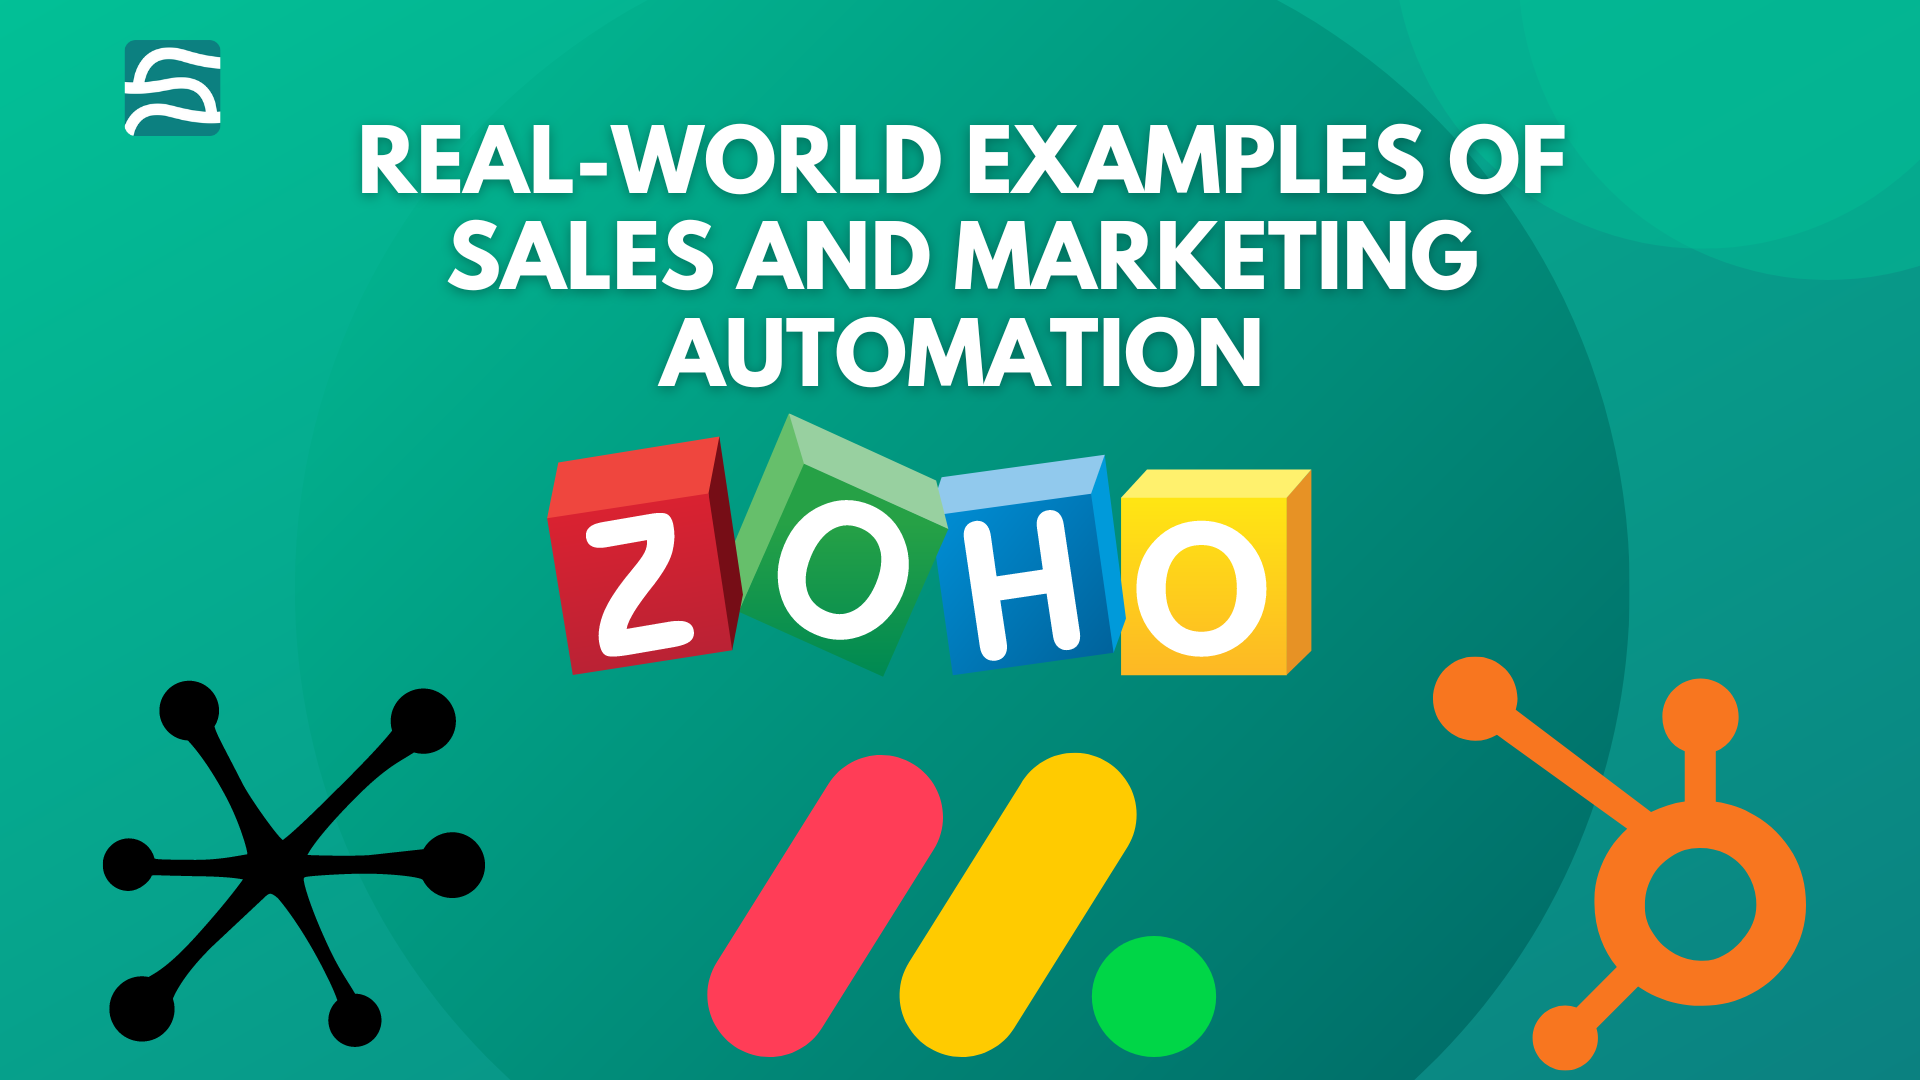 sales and marketing: Real-World Examples of Sales and Marketing Automation